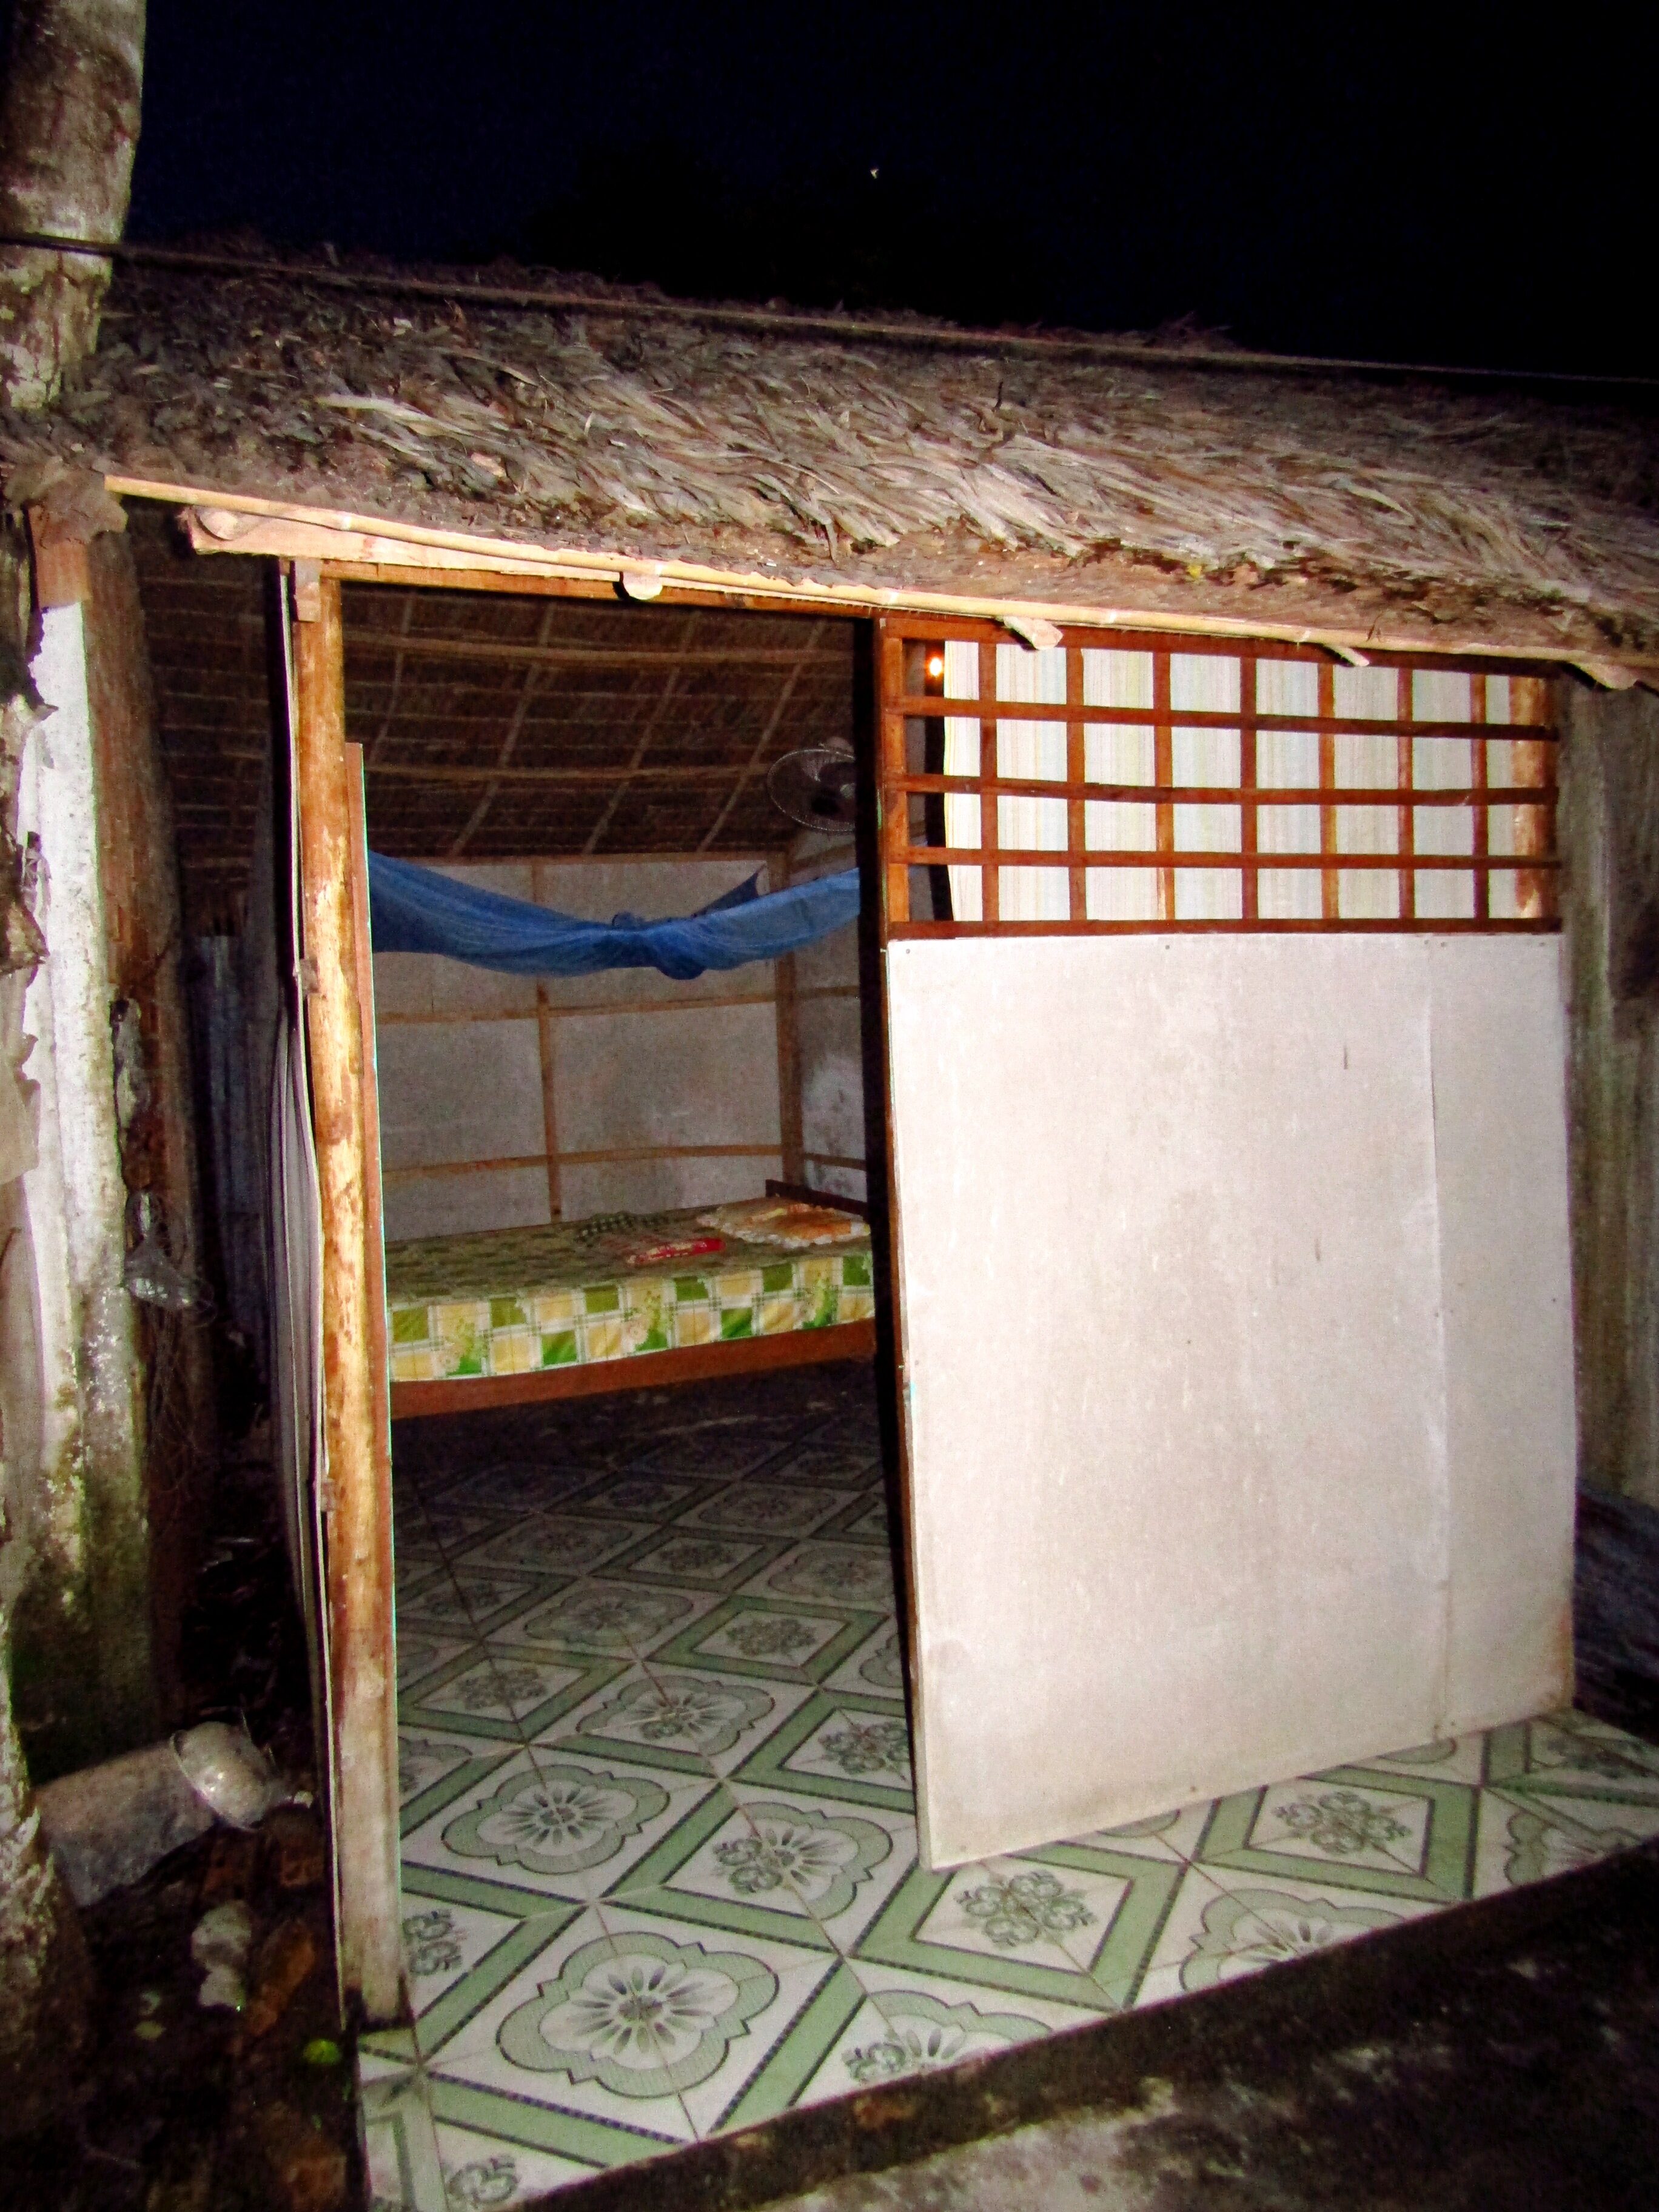 My humble abode in the Mekong Delta